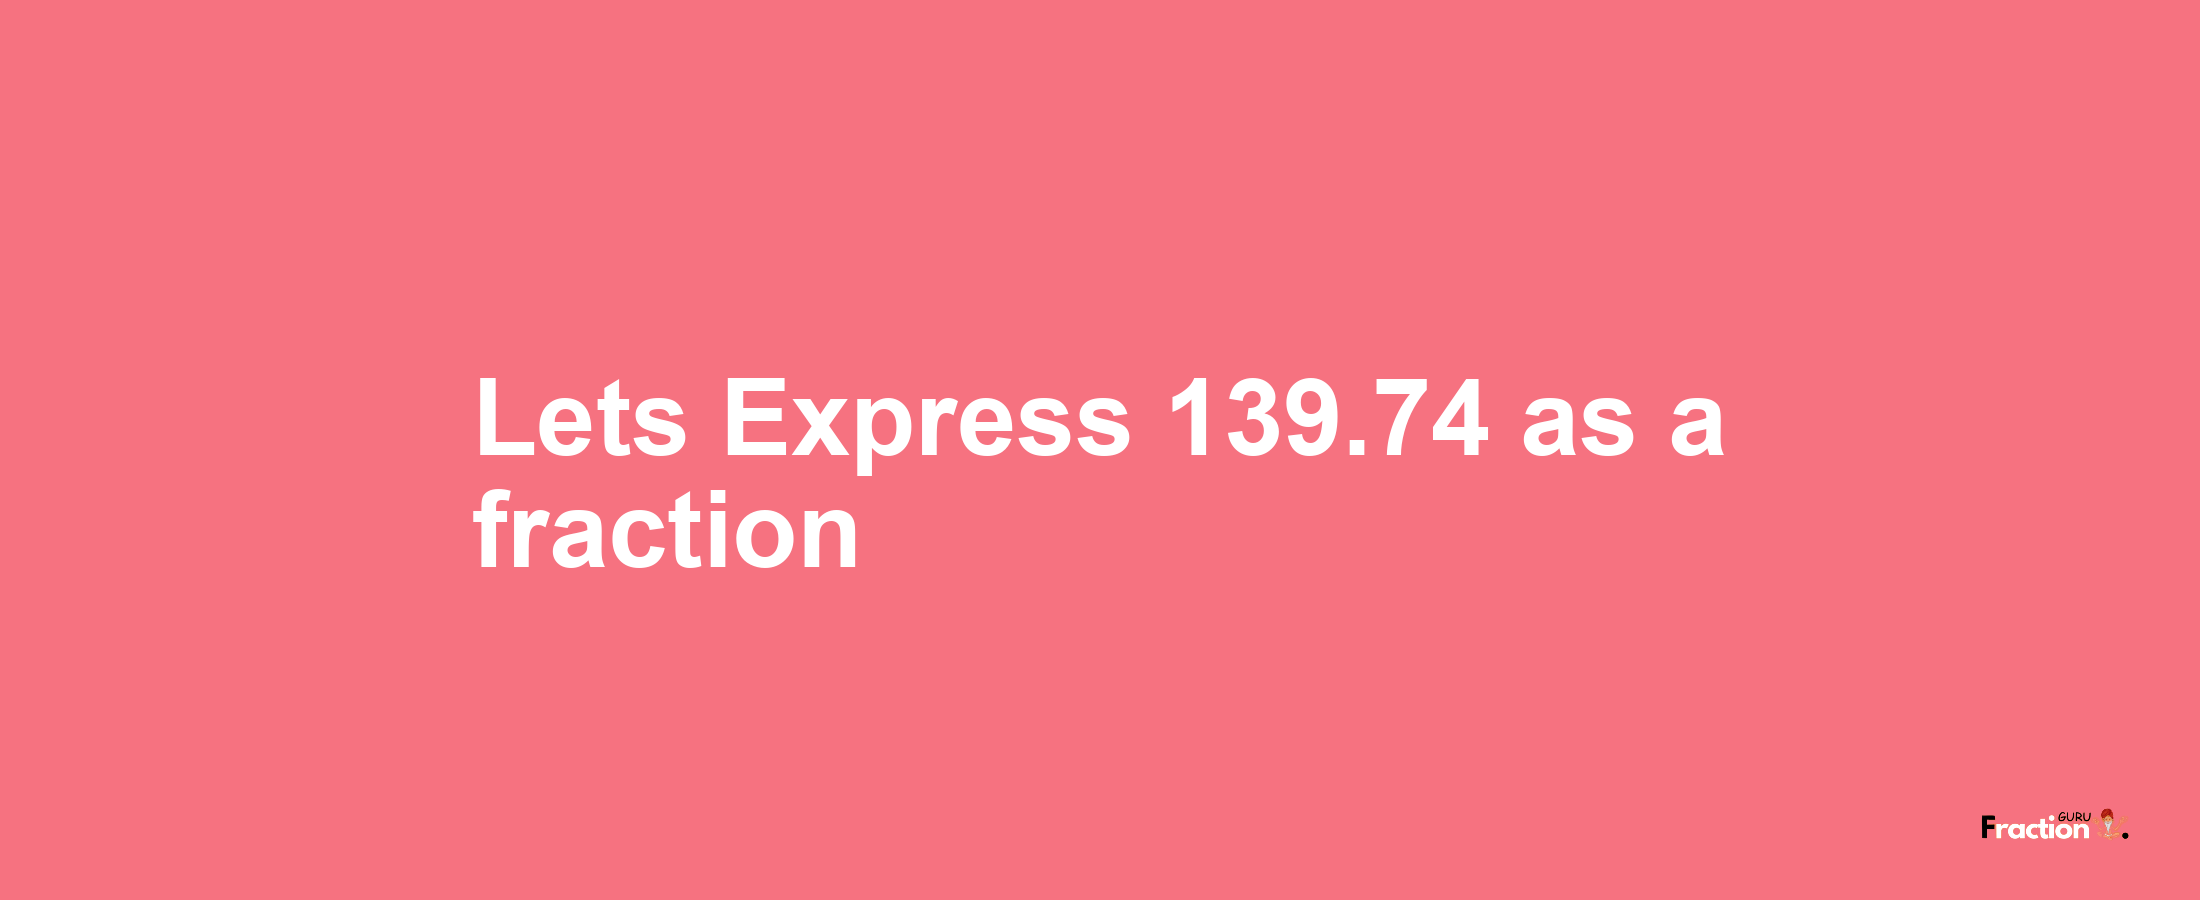 Lets Express 139.74 as afraction